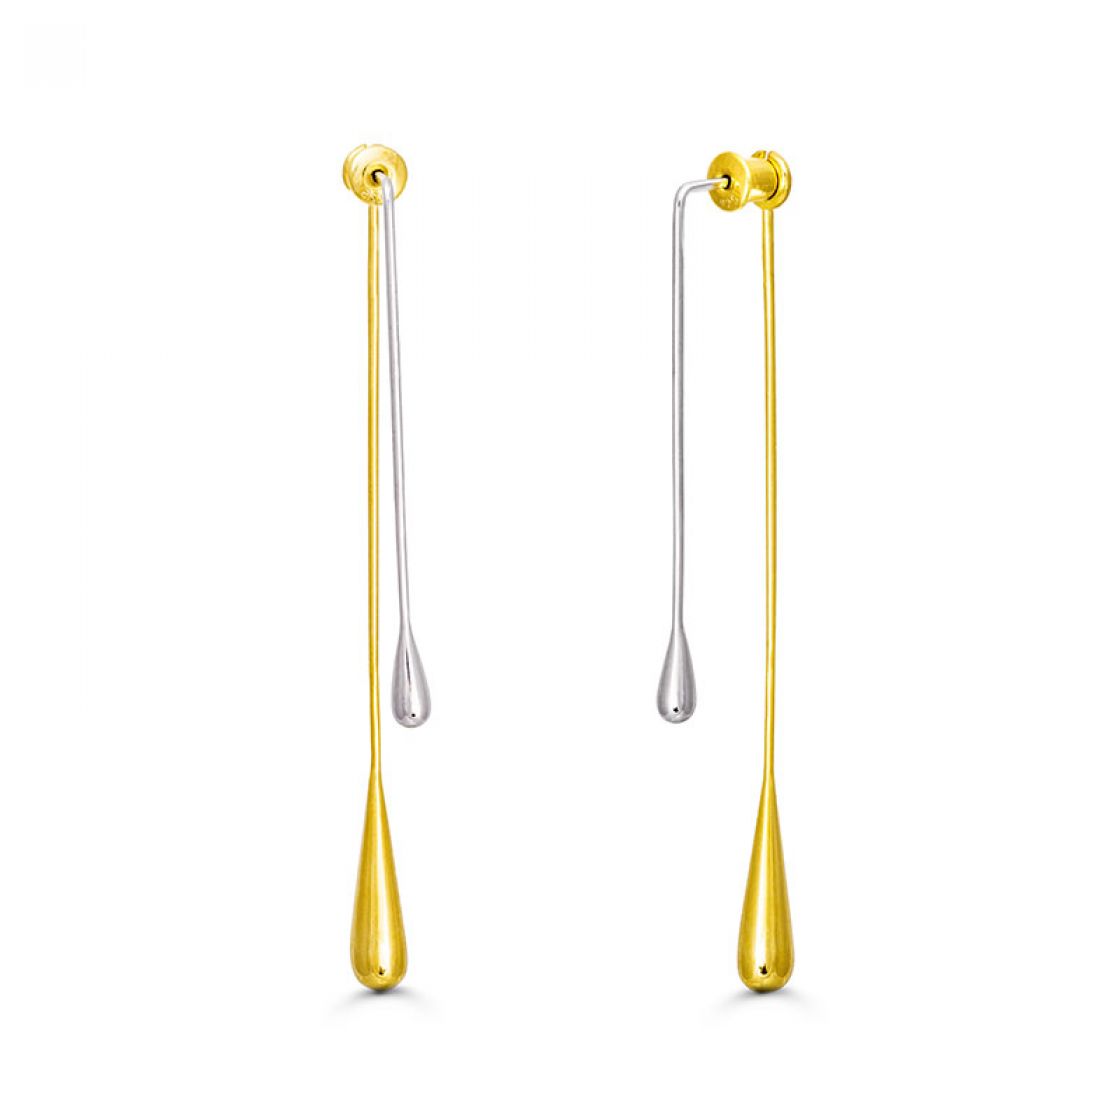 A bold statement piece. Double sided flowing earrings that complement your look with their elegant and fluid design